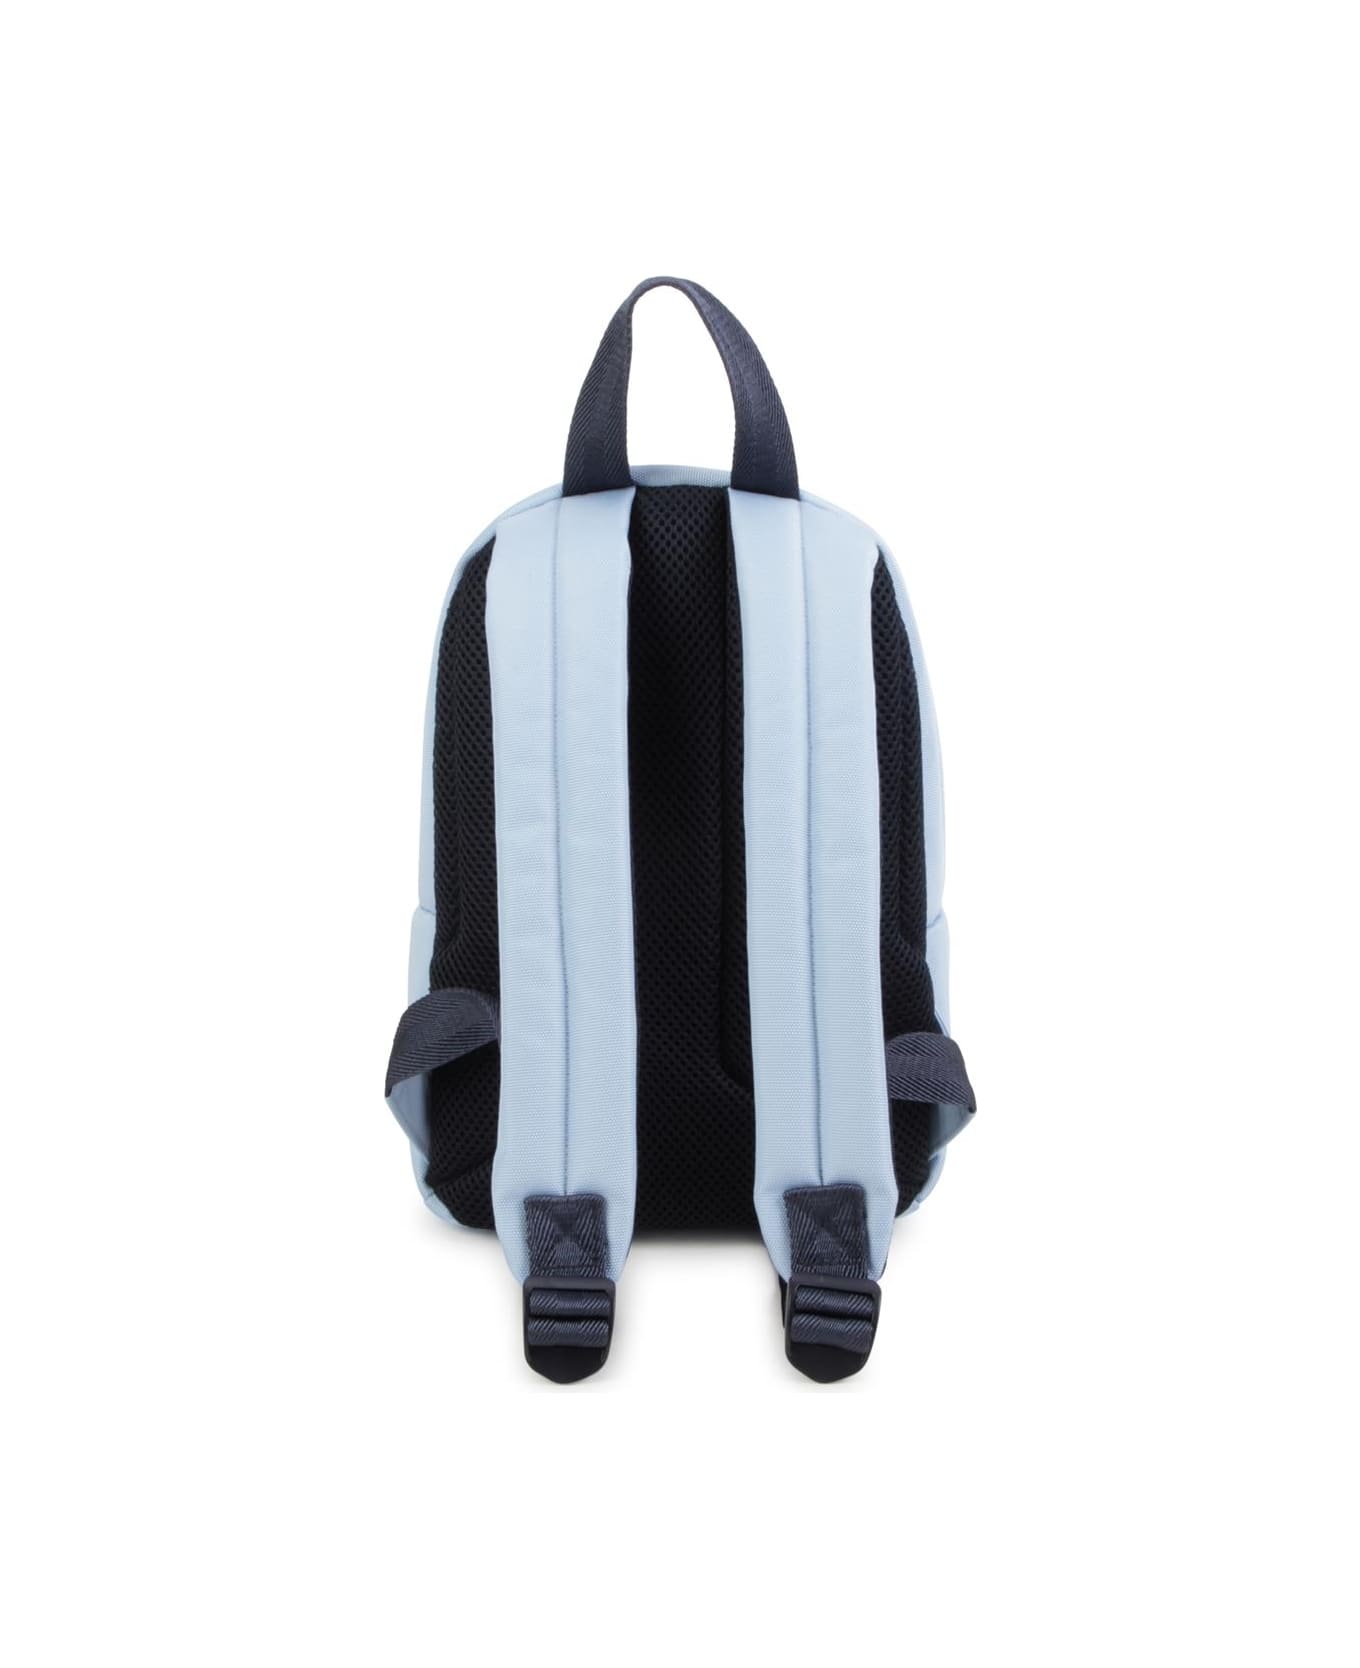 Hugo Boss Backpack With Print - Light blue アクセサリー＆ギフト